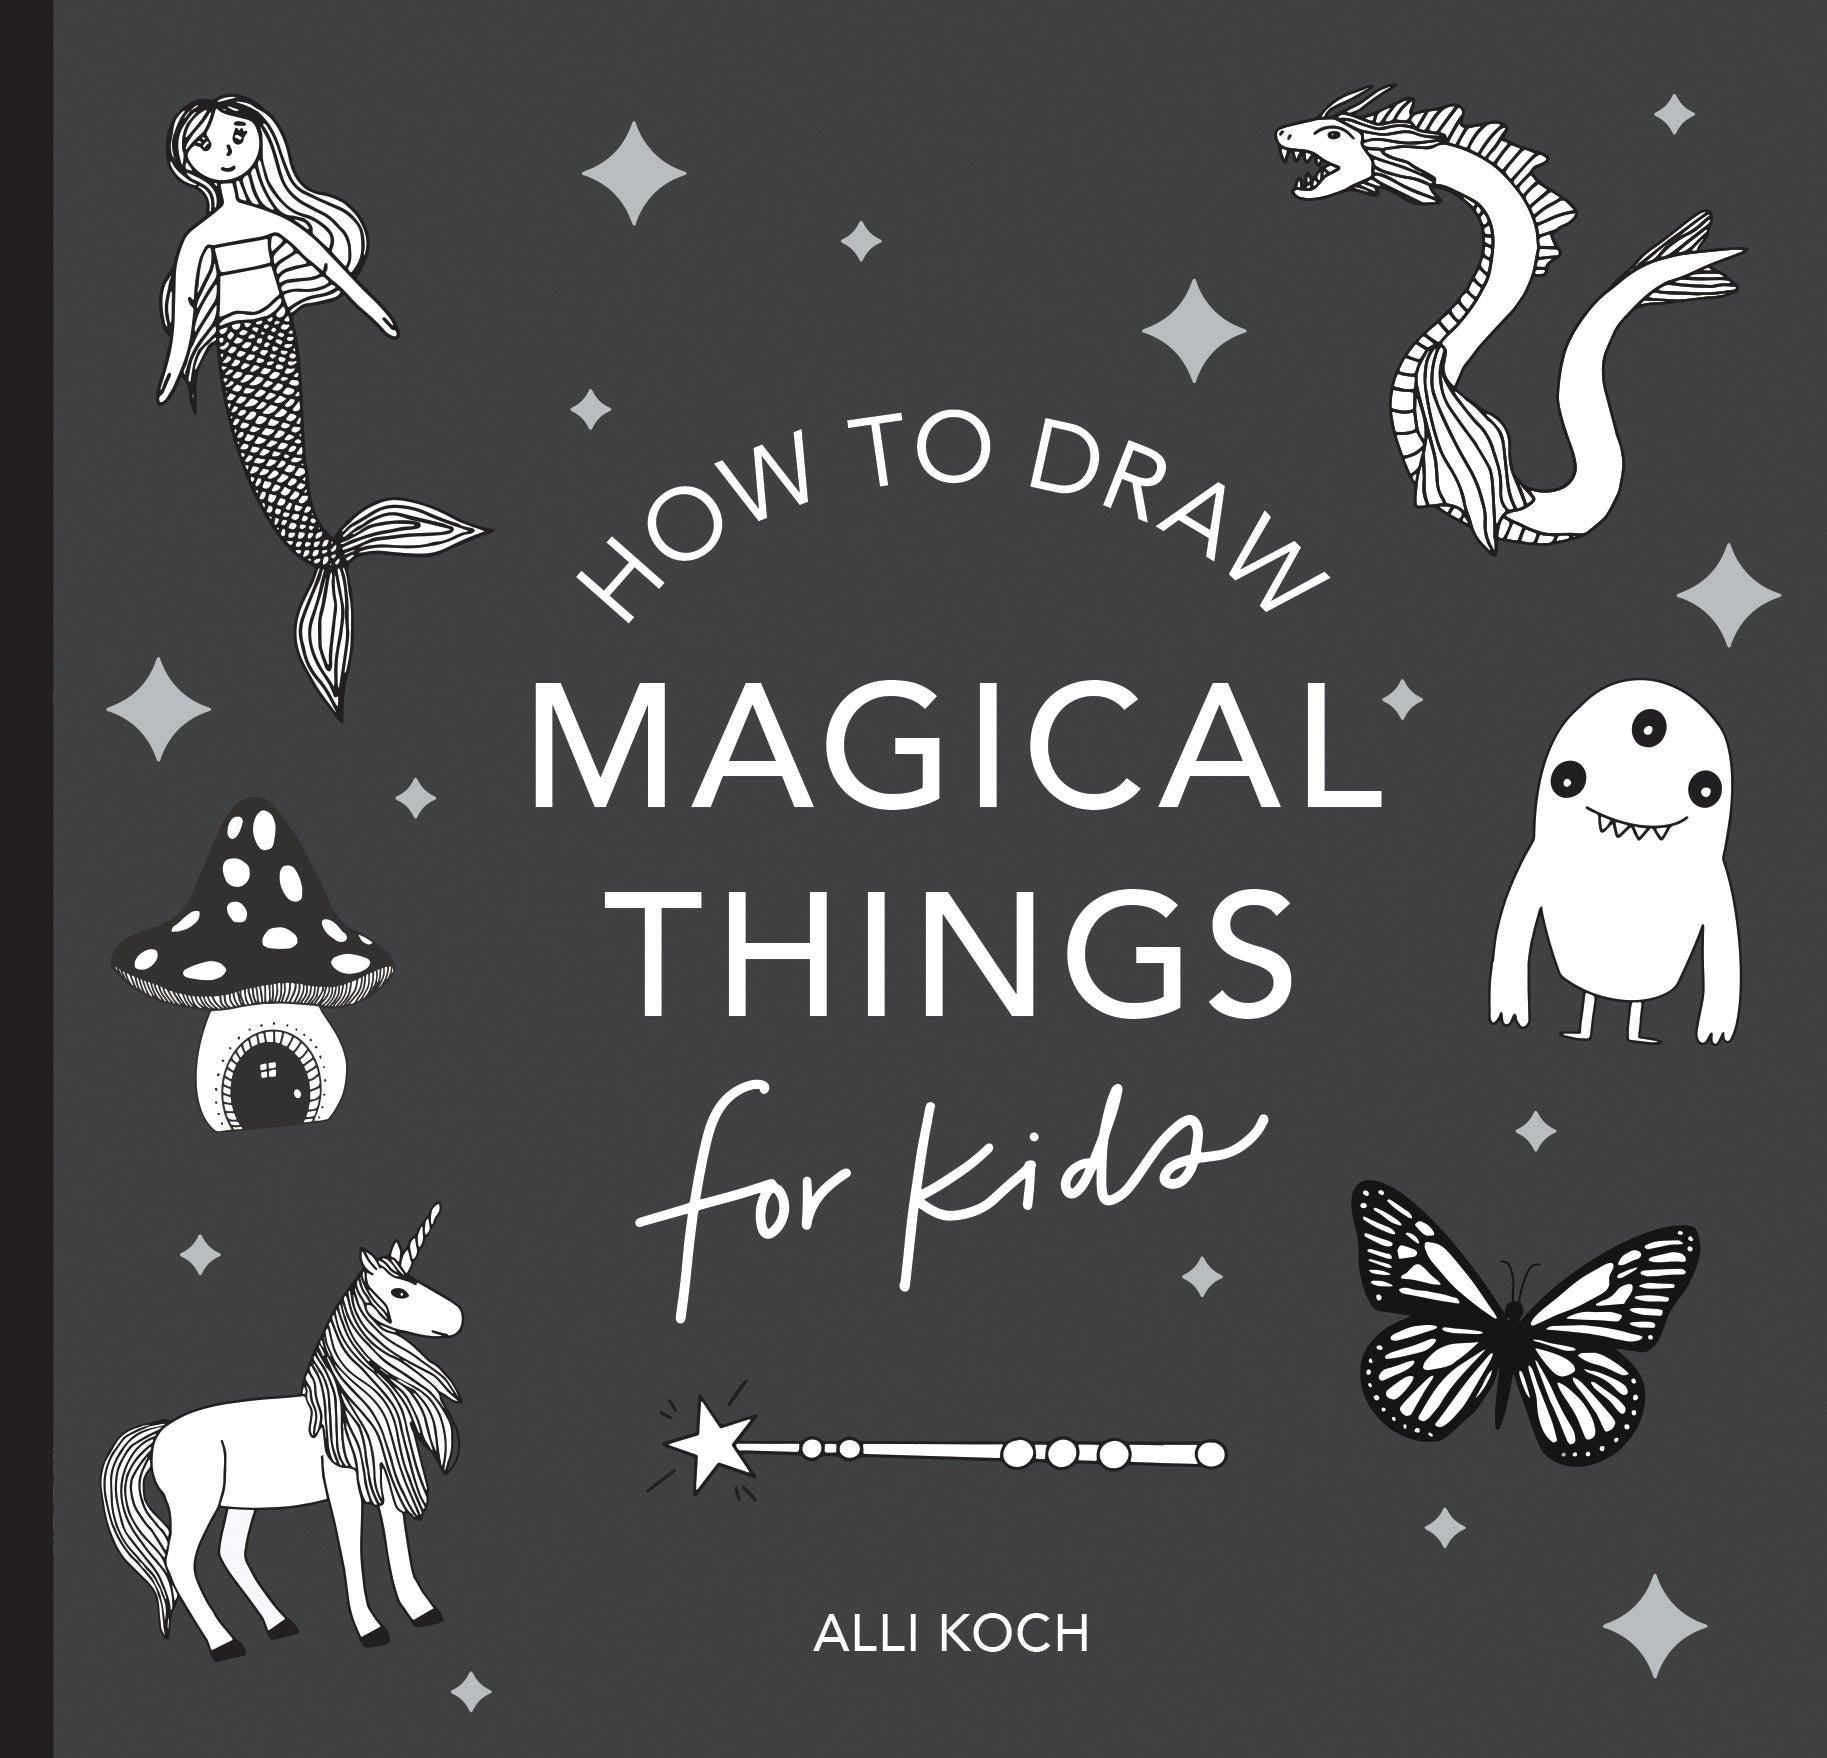 How to Draw: Magical Things - for kids